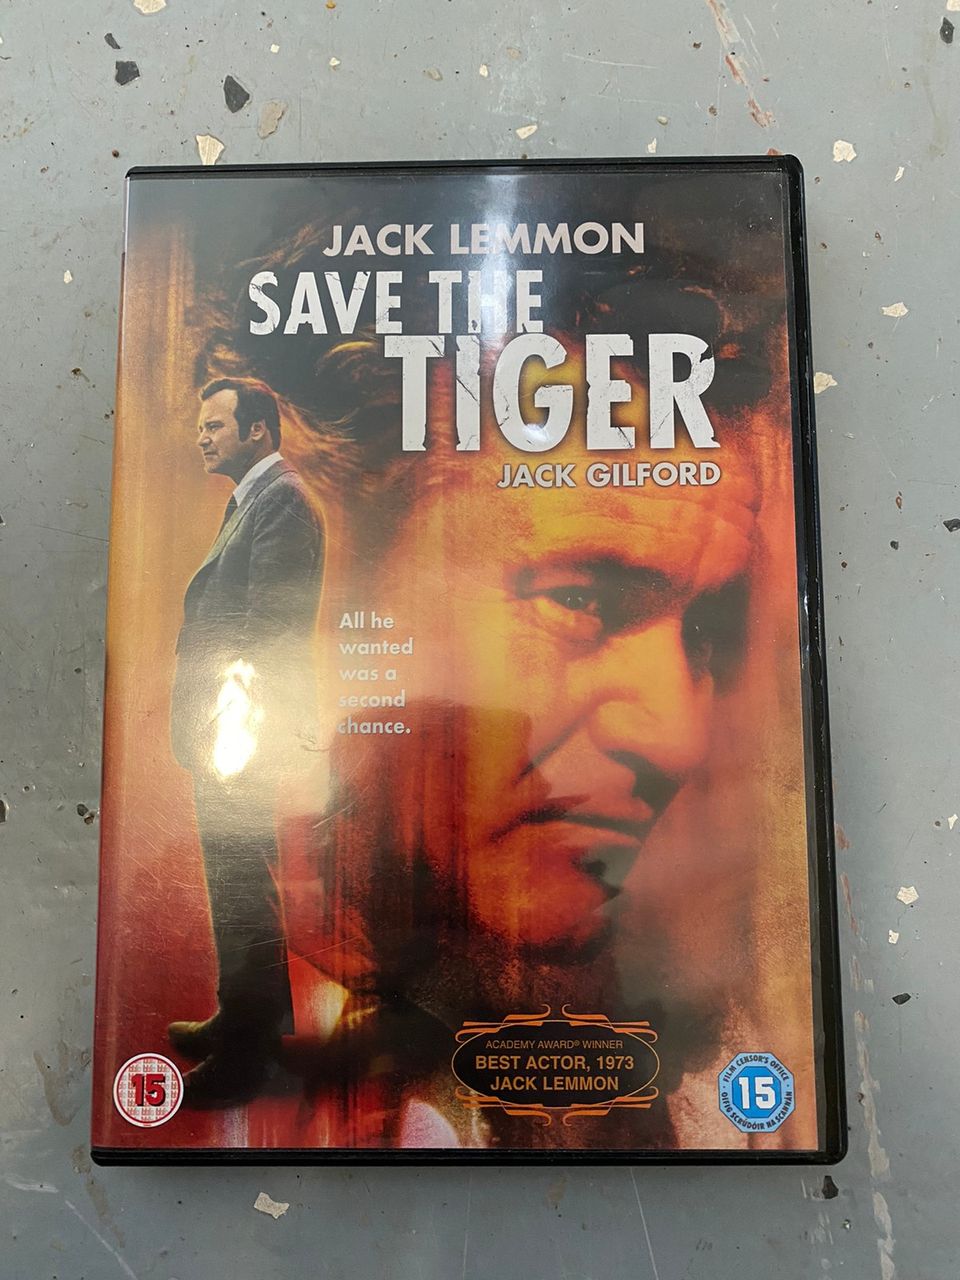 Save the tiger dvd